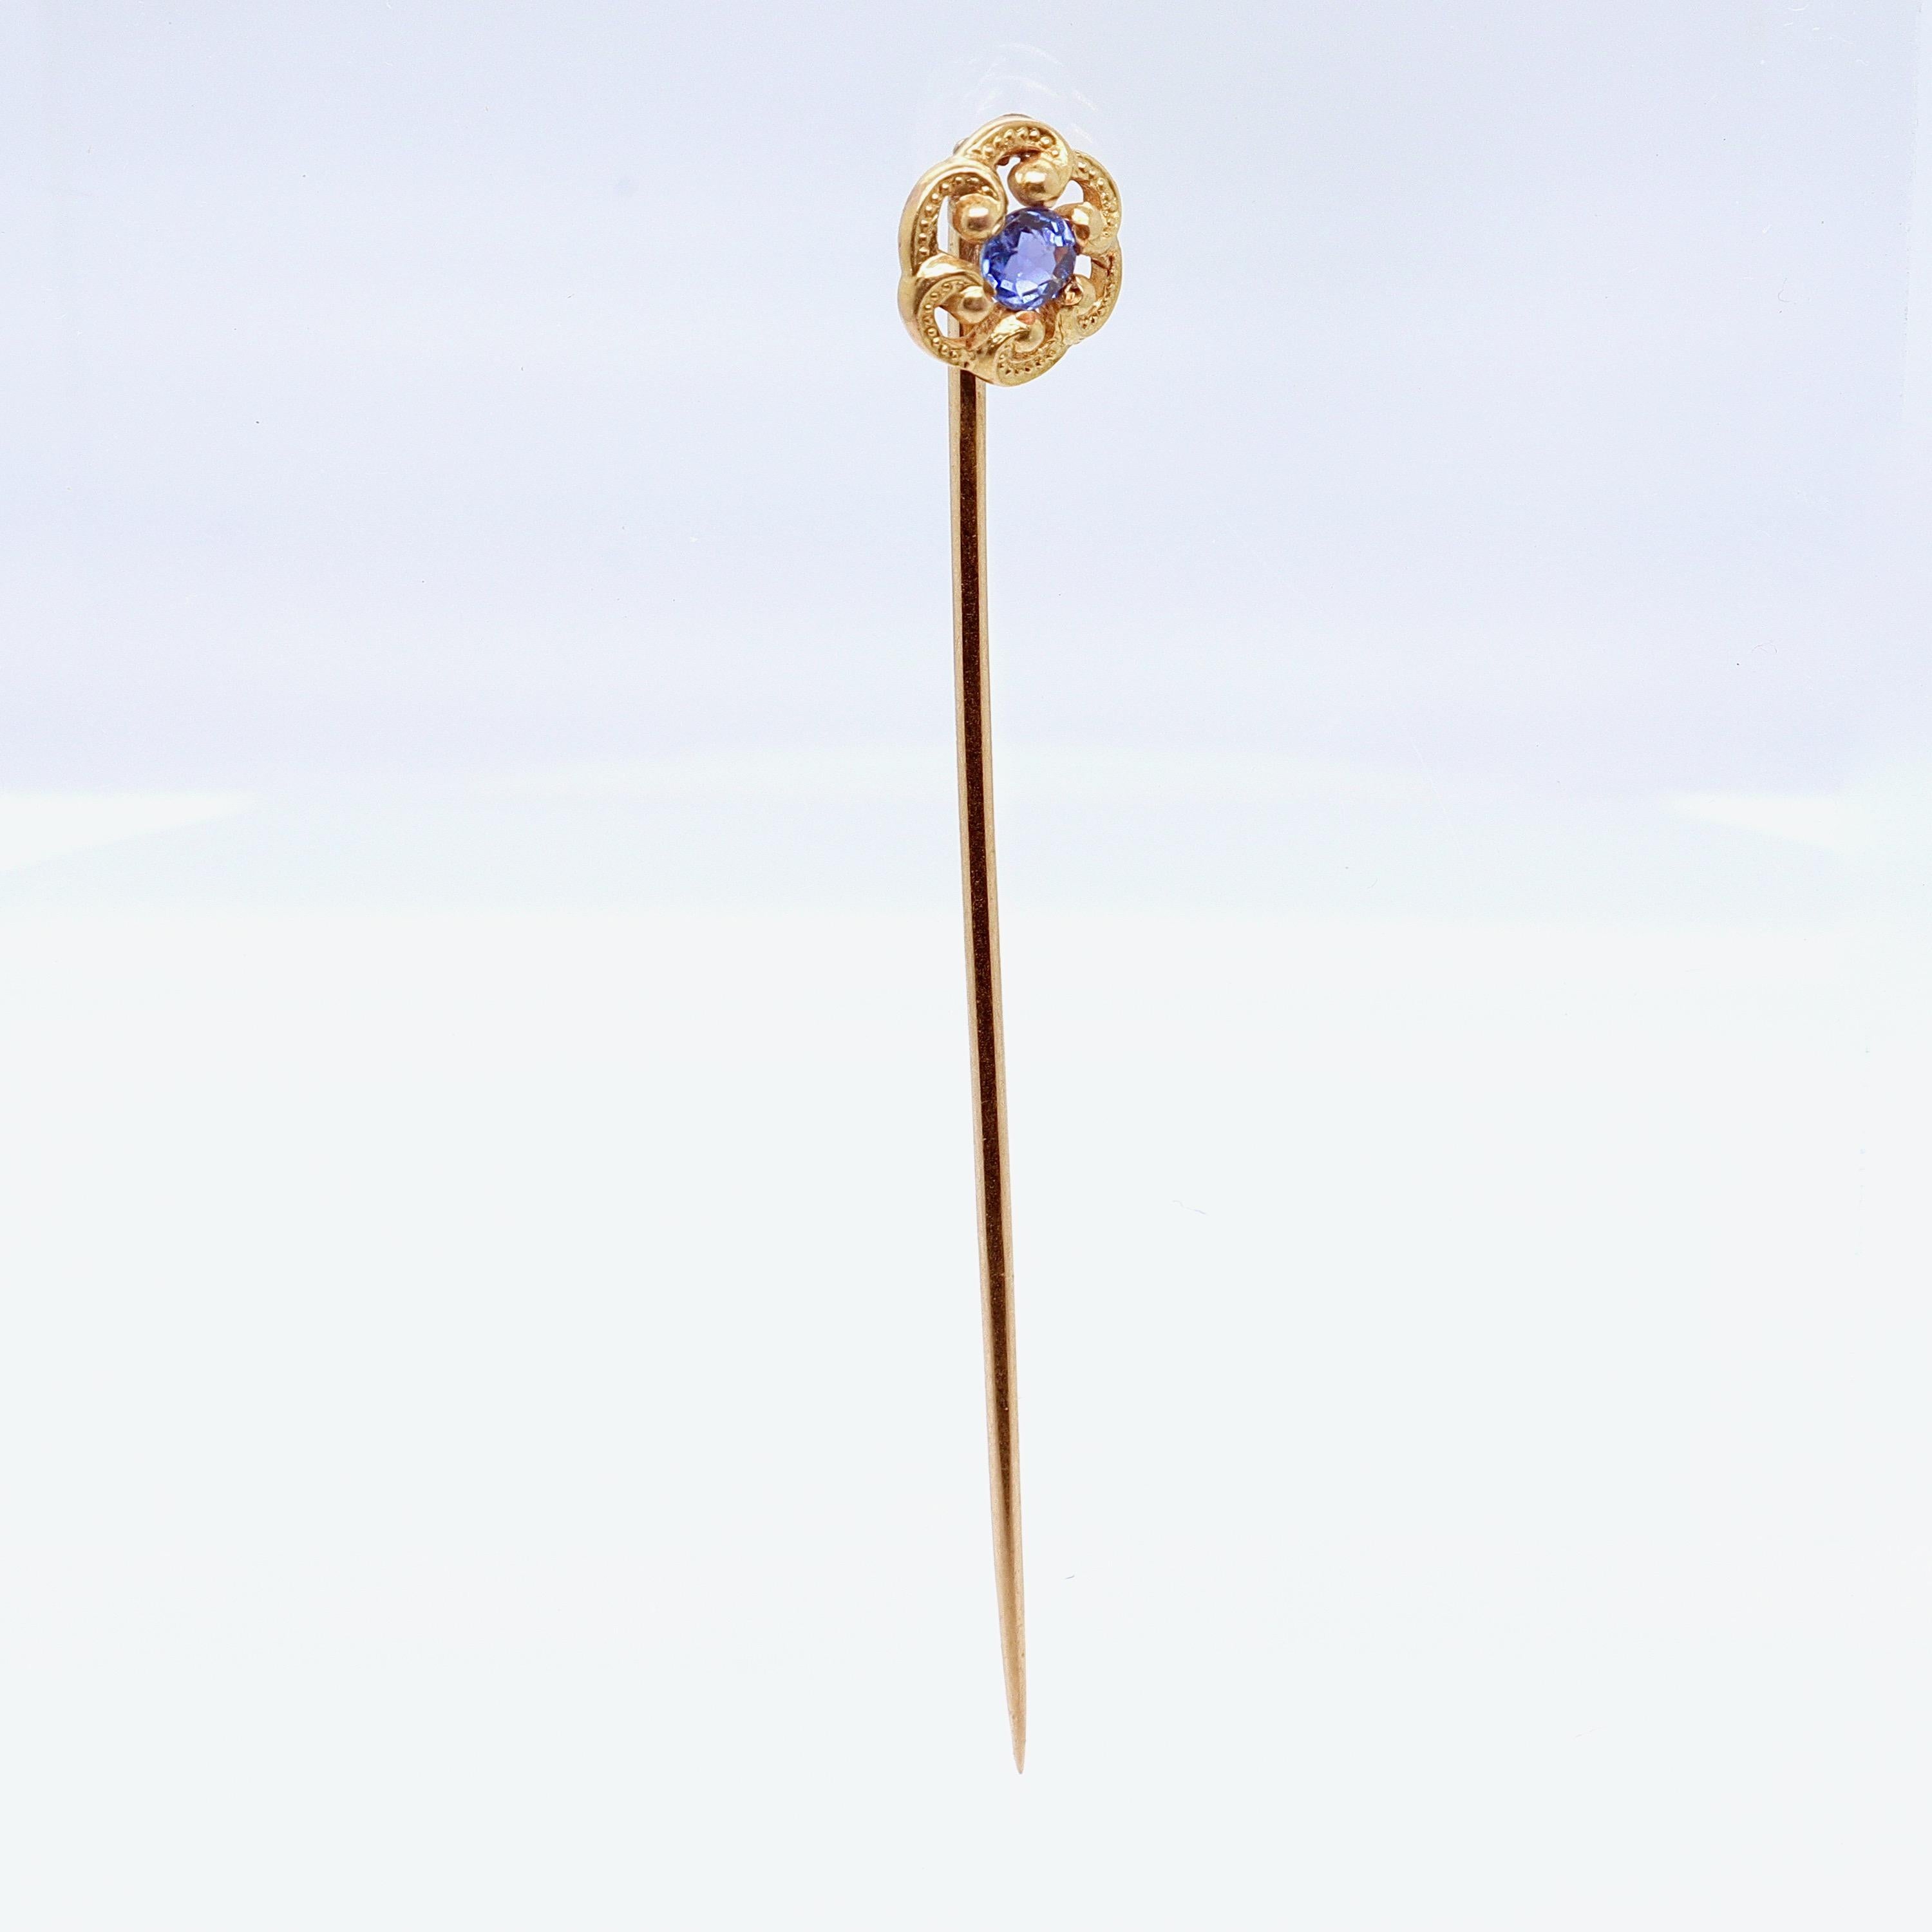 A fine Edwardian stick pin.

By Marcus & Co.

In 14 karat yellow gold with a small, round faceted blue sapphire.

Simply a wonderful signed antique stick pin!

Date:
Early 20th Century

Overall Condition:
It is in overall good, as-pictured, used